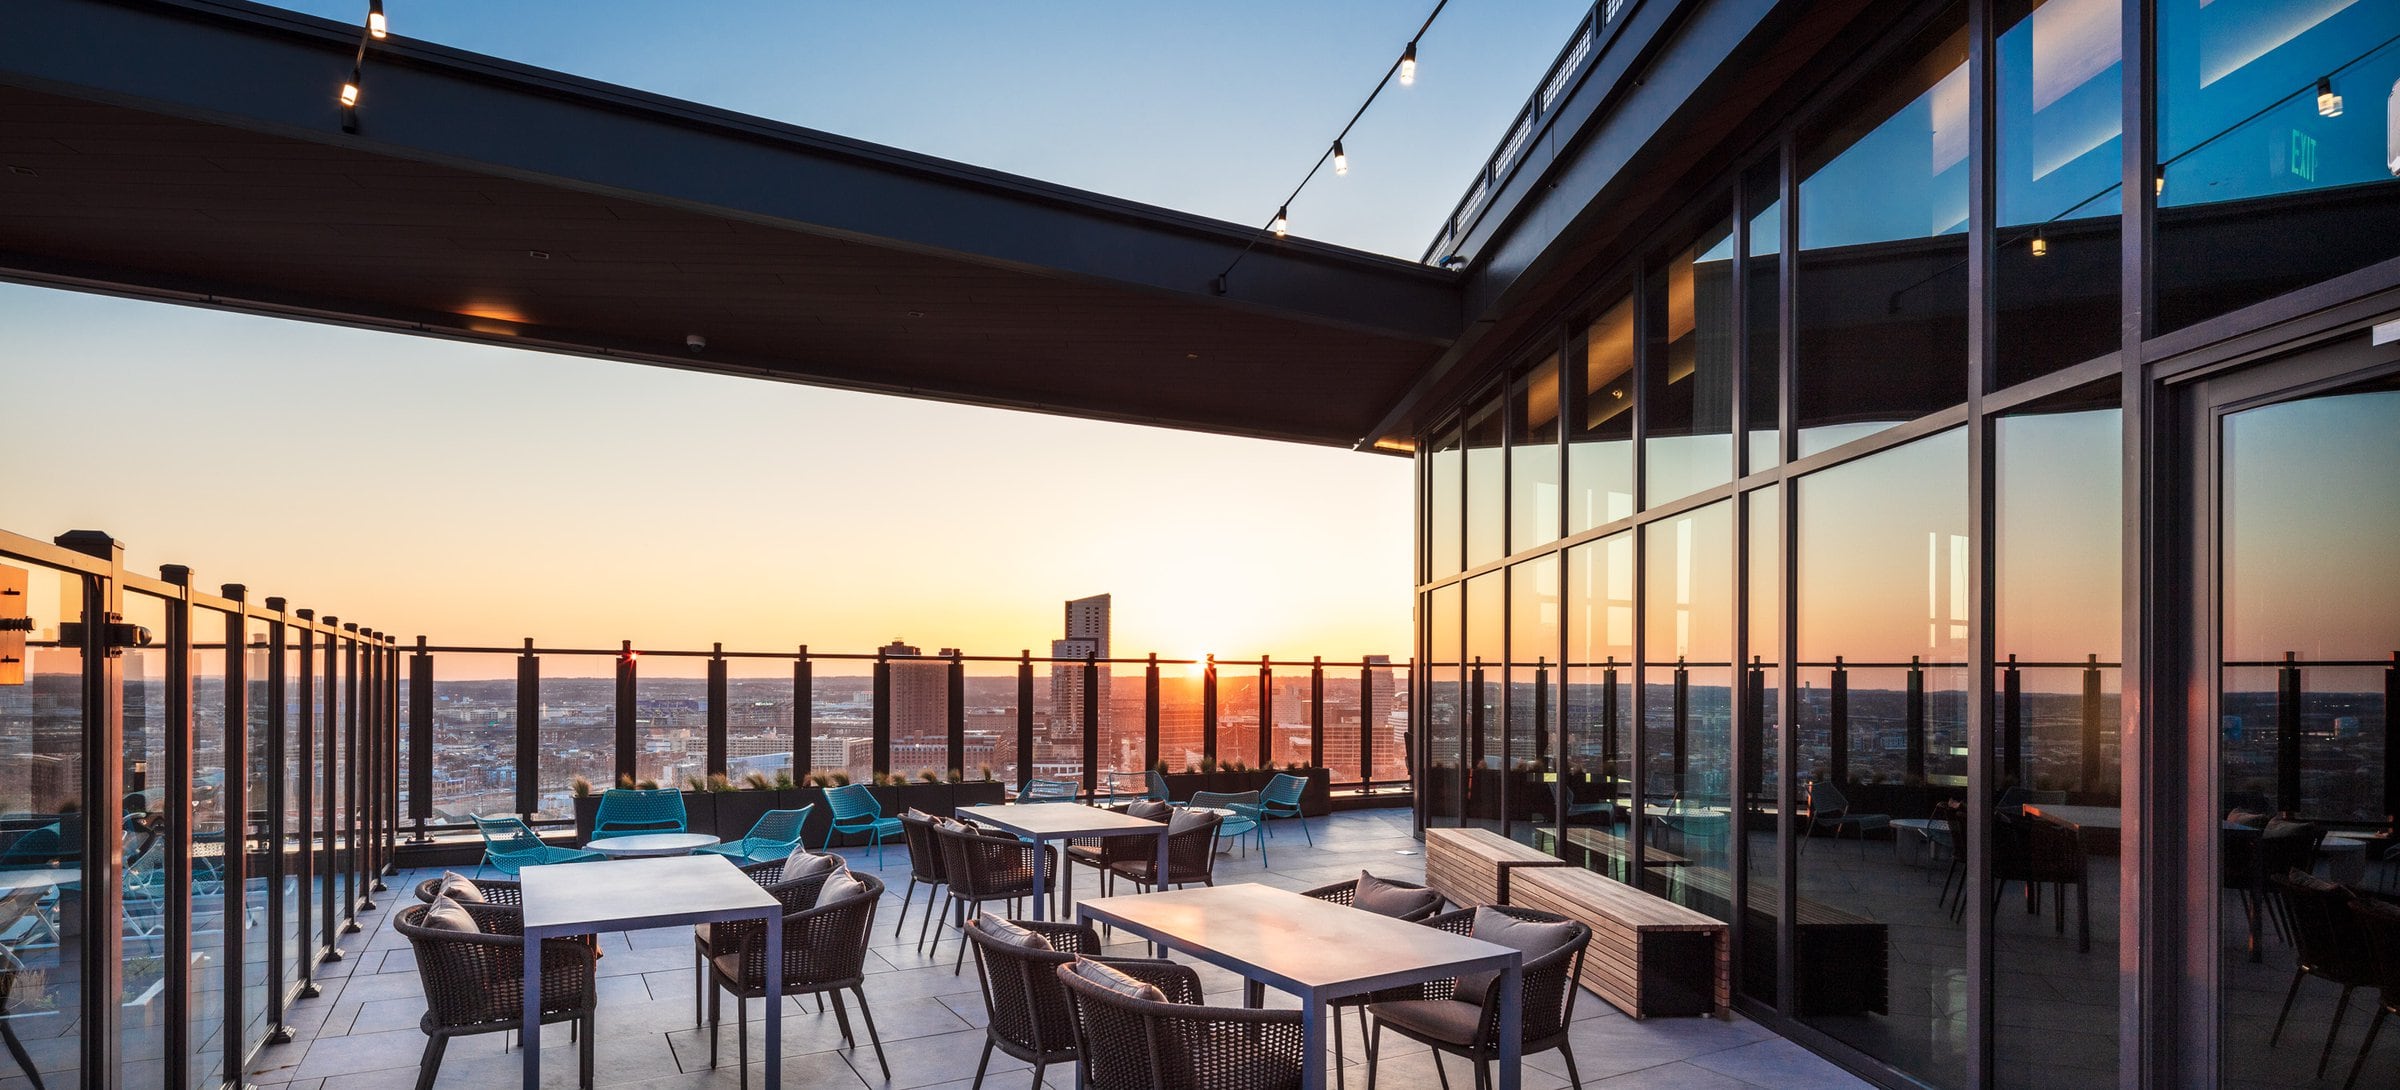 24th Floor rooftop terrace with grill stations and multiple seating areas